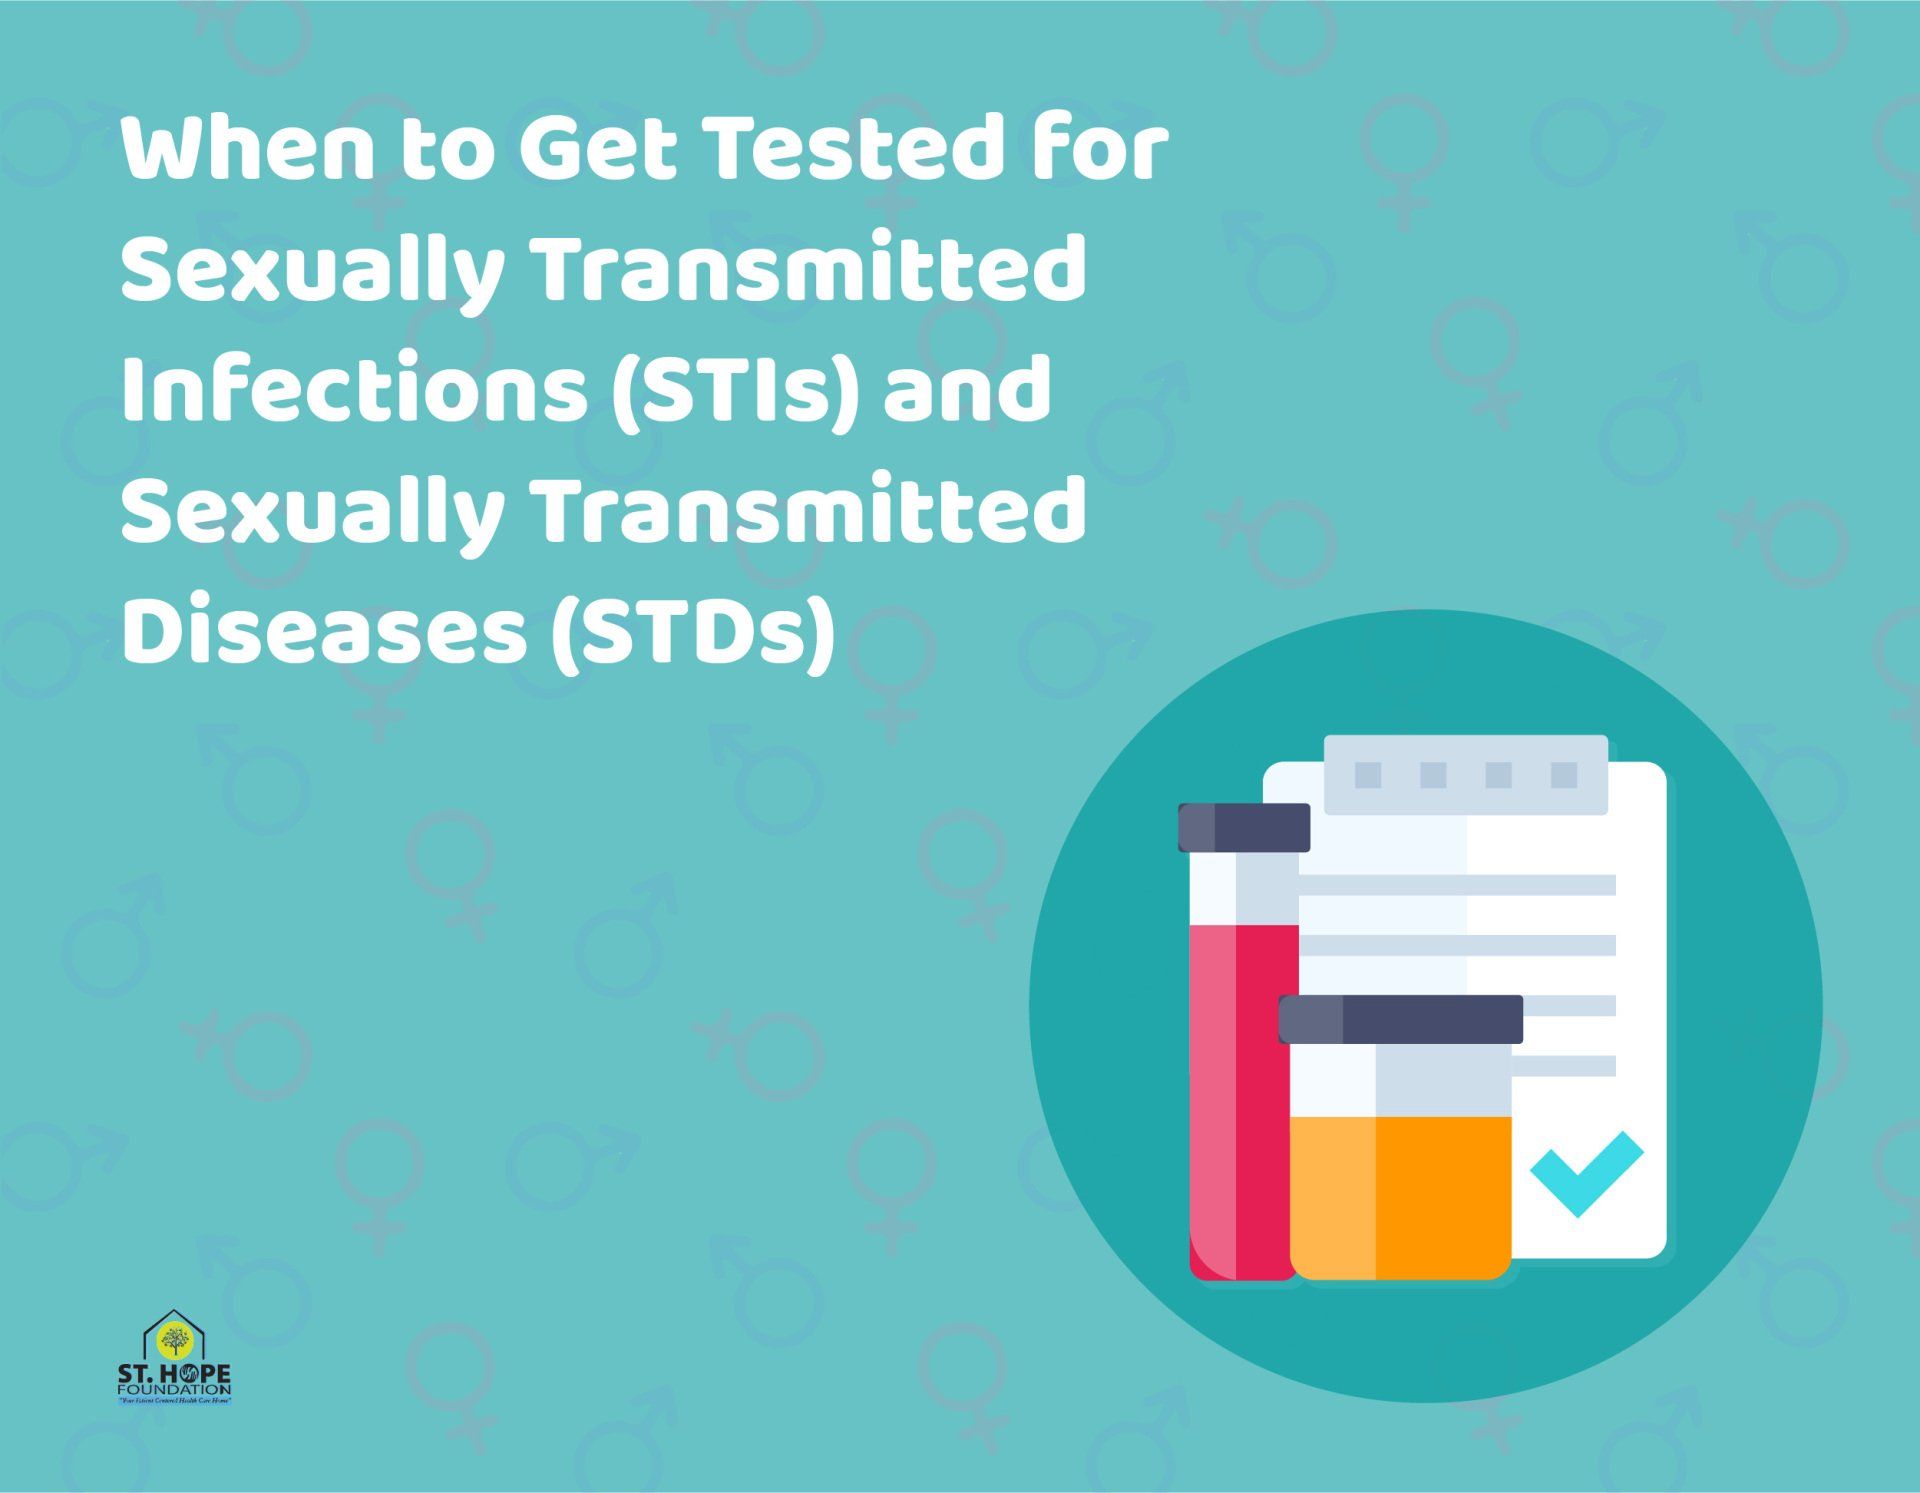 When To Get Tested For Sexual Transmitted Infections Stis And Sexually Transmitted Diseases Stds